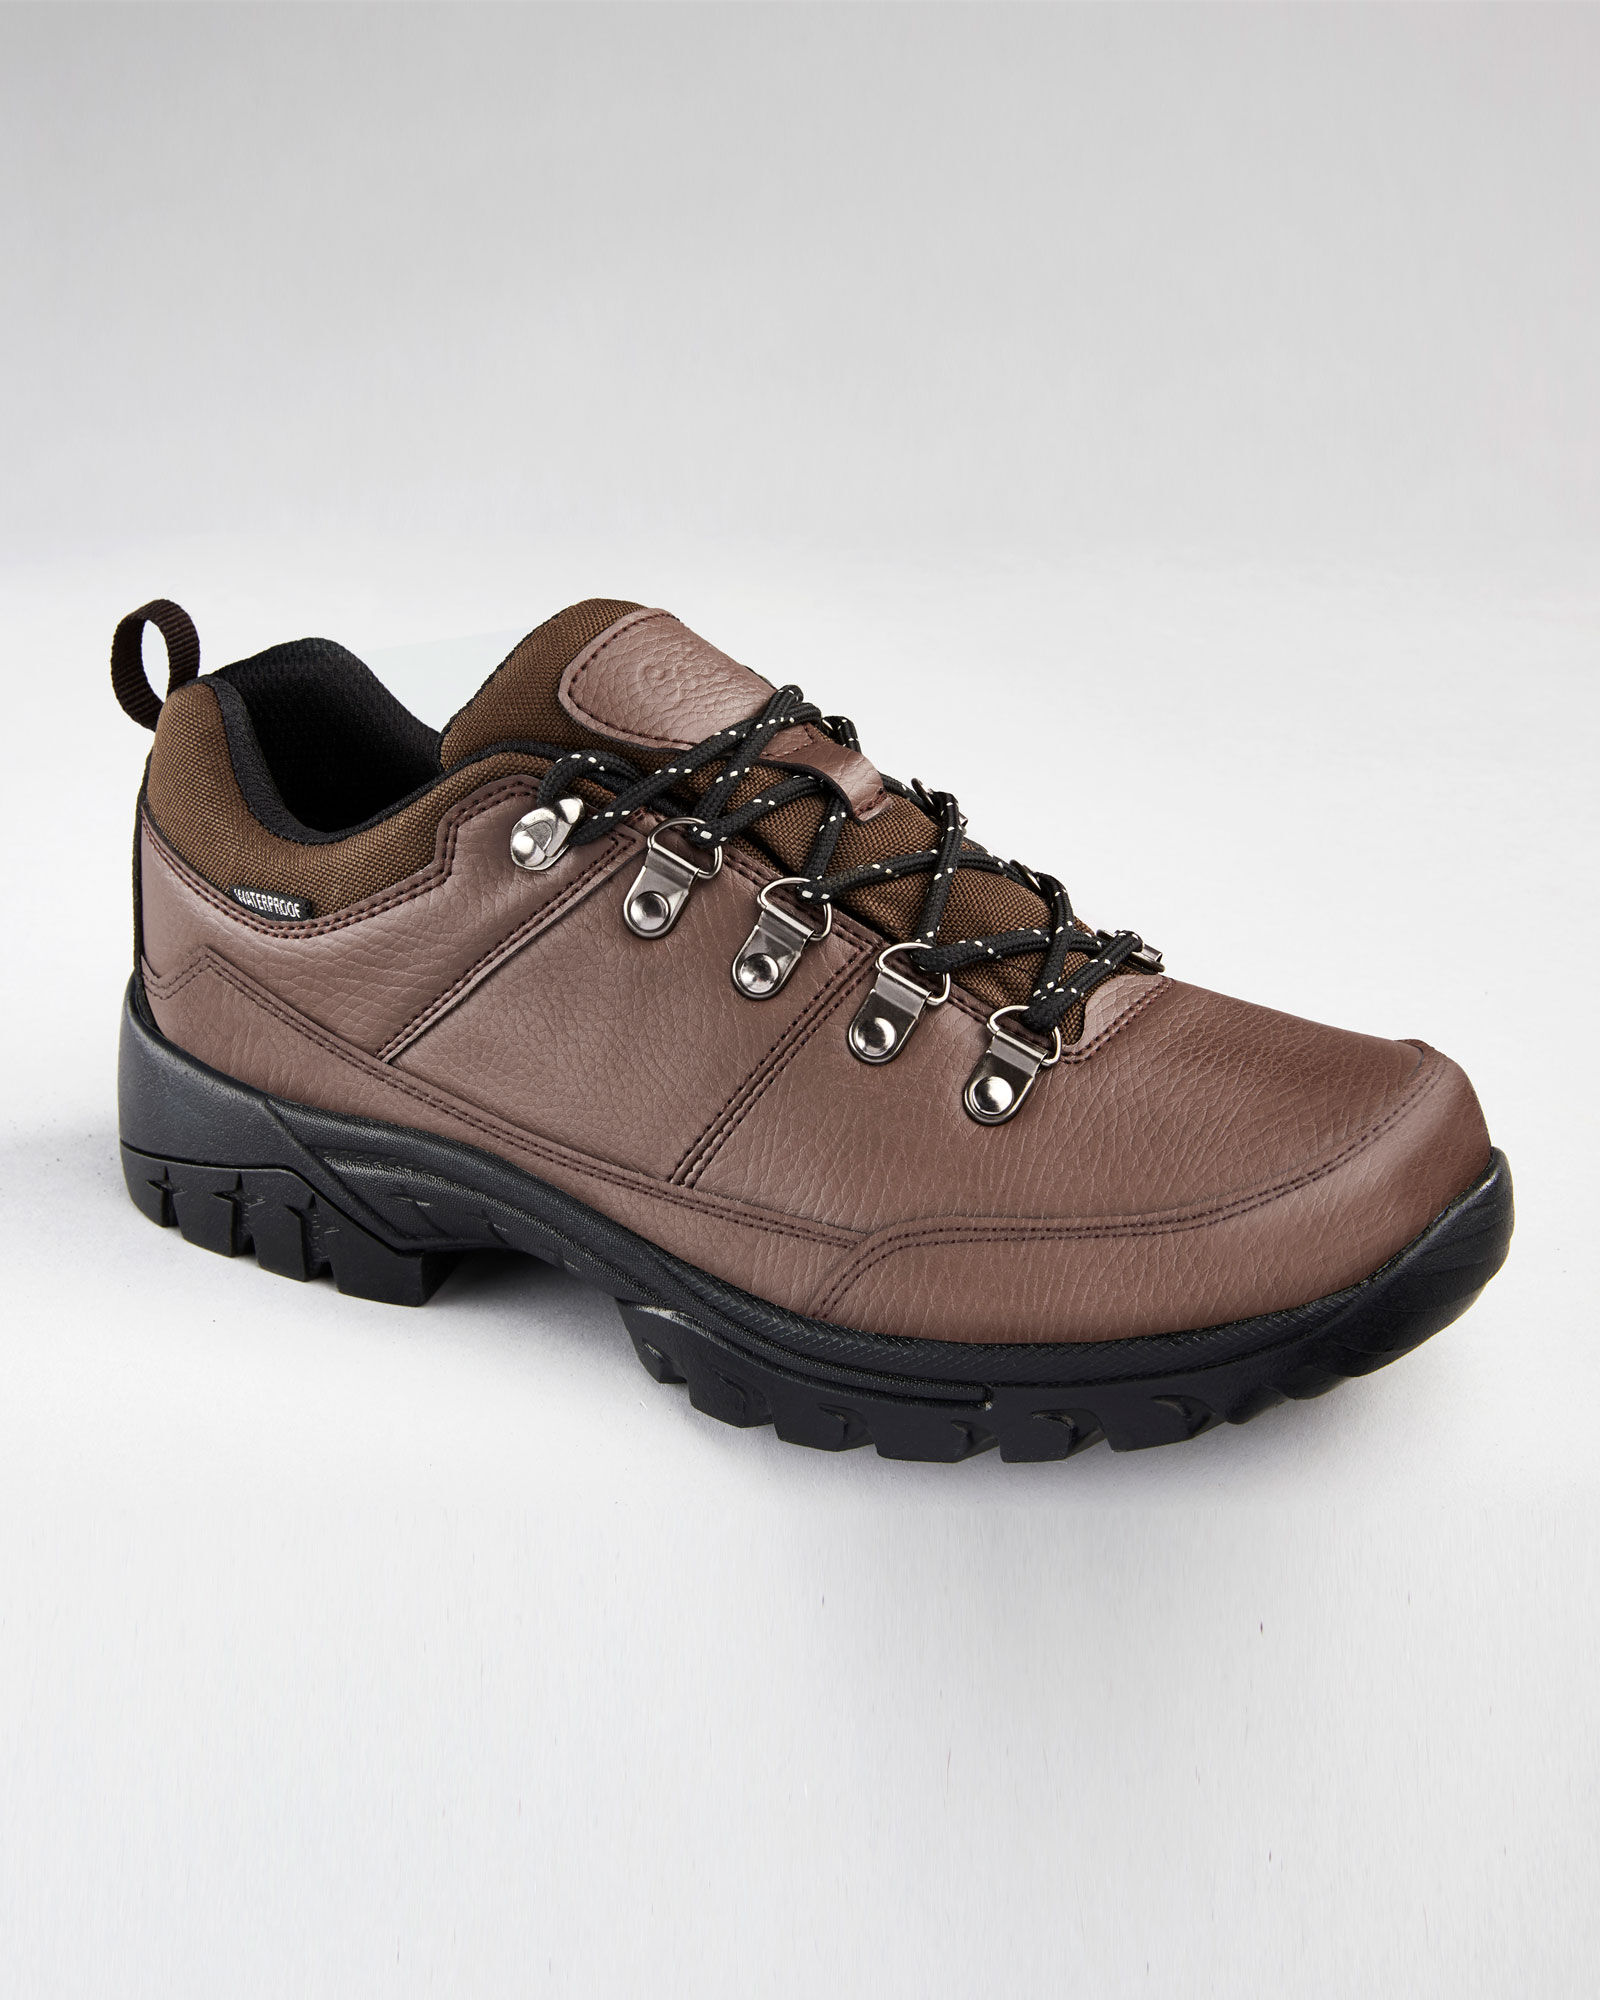 cotton traders hiking boots